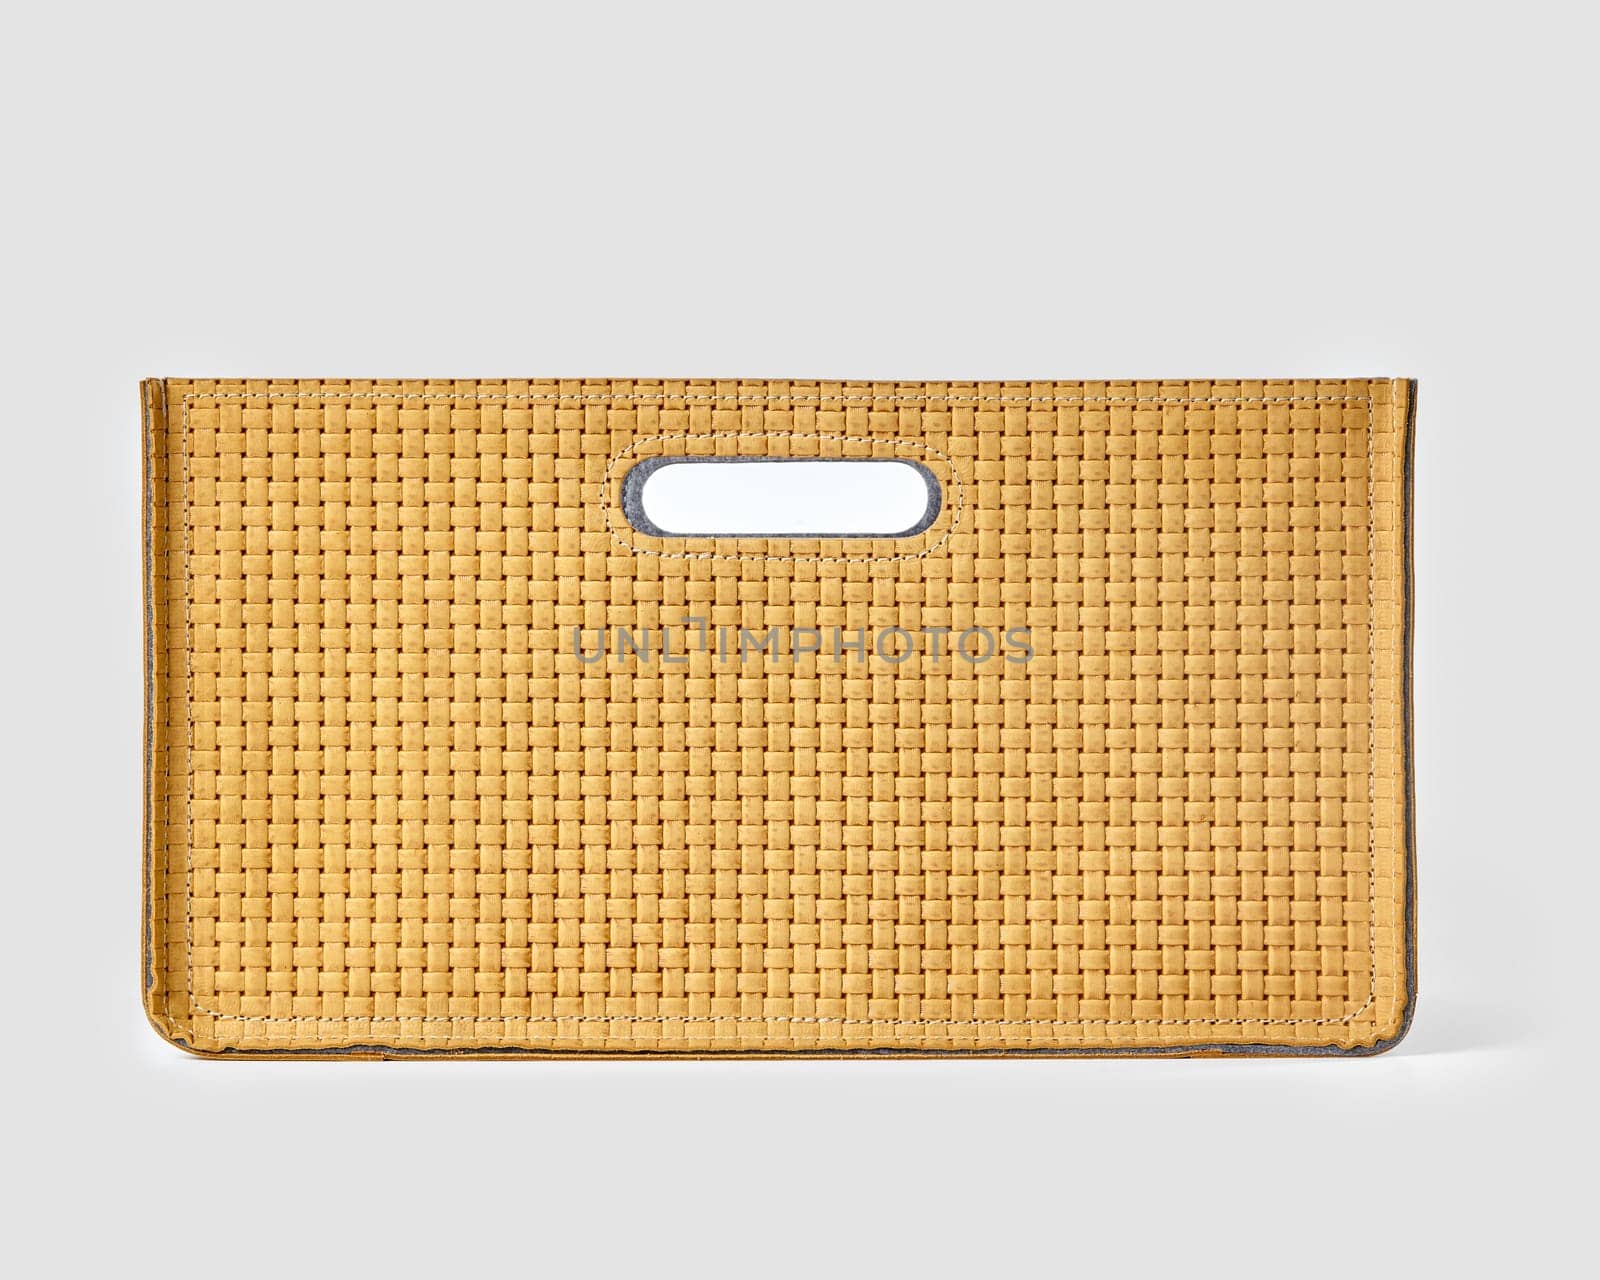 Tan woven suede storage box with slotted handles by nazarovsergey